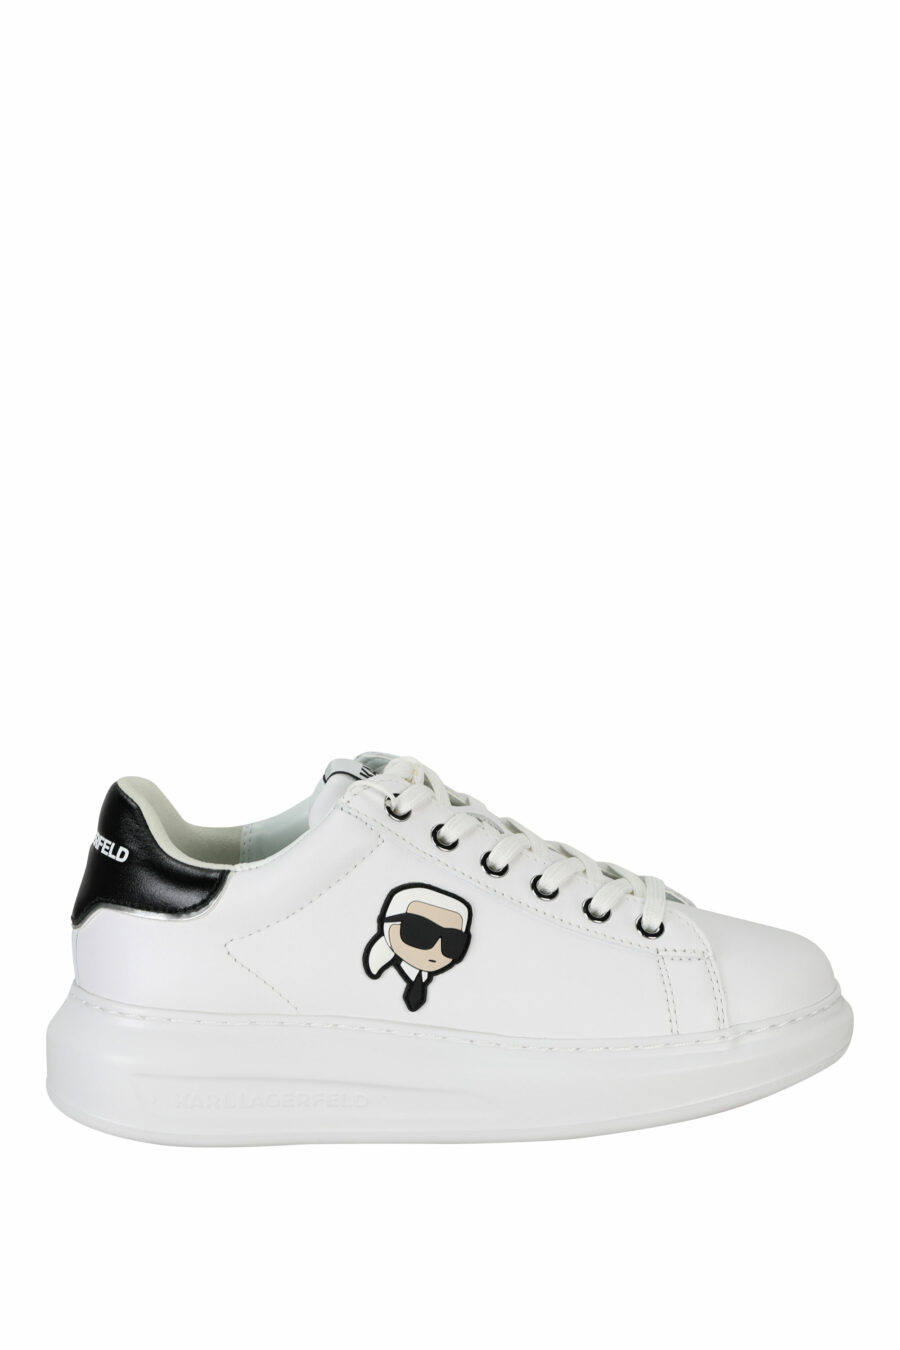 White "Kapri" trainers with rubber logo and black detail - 5059529351020